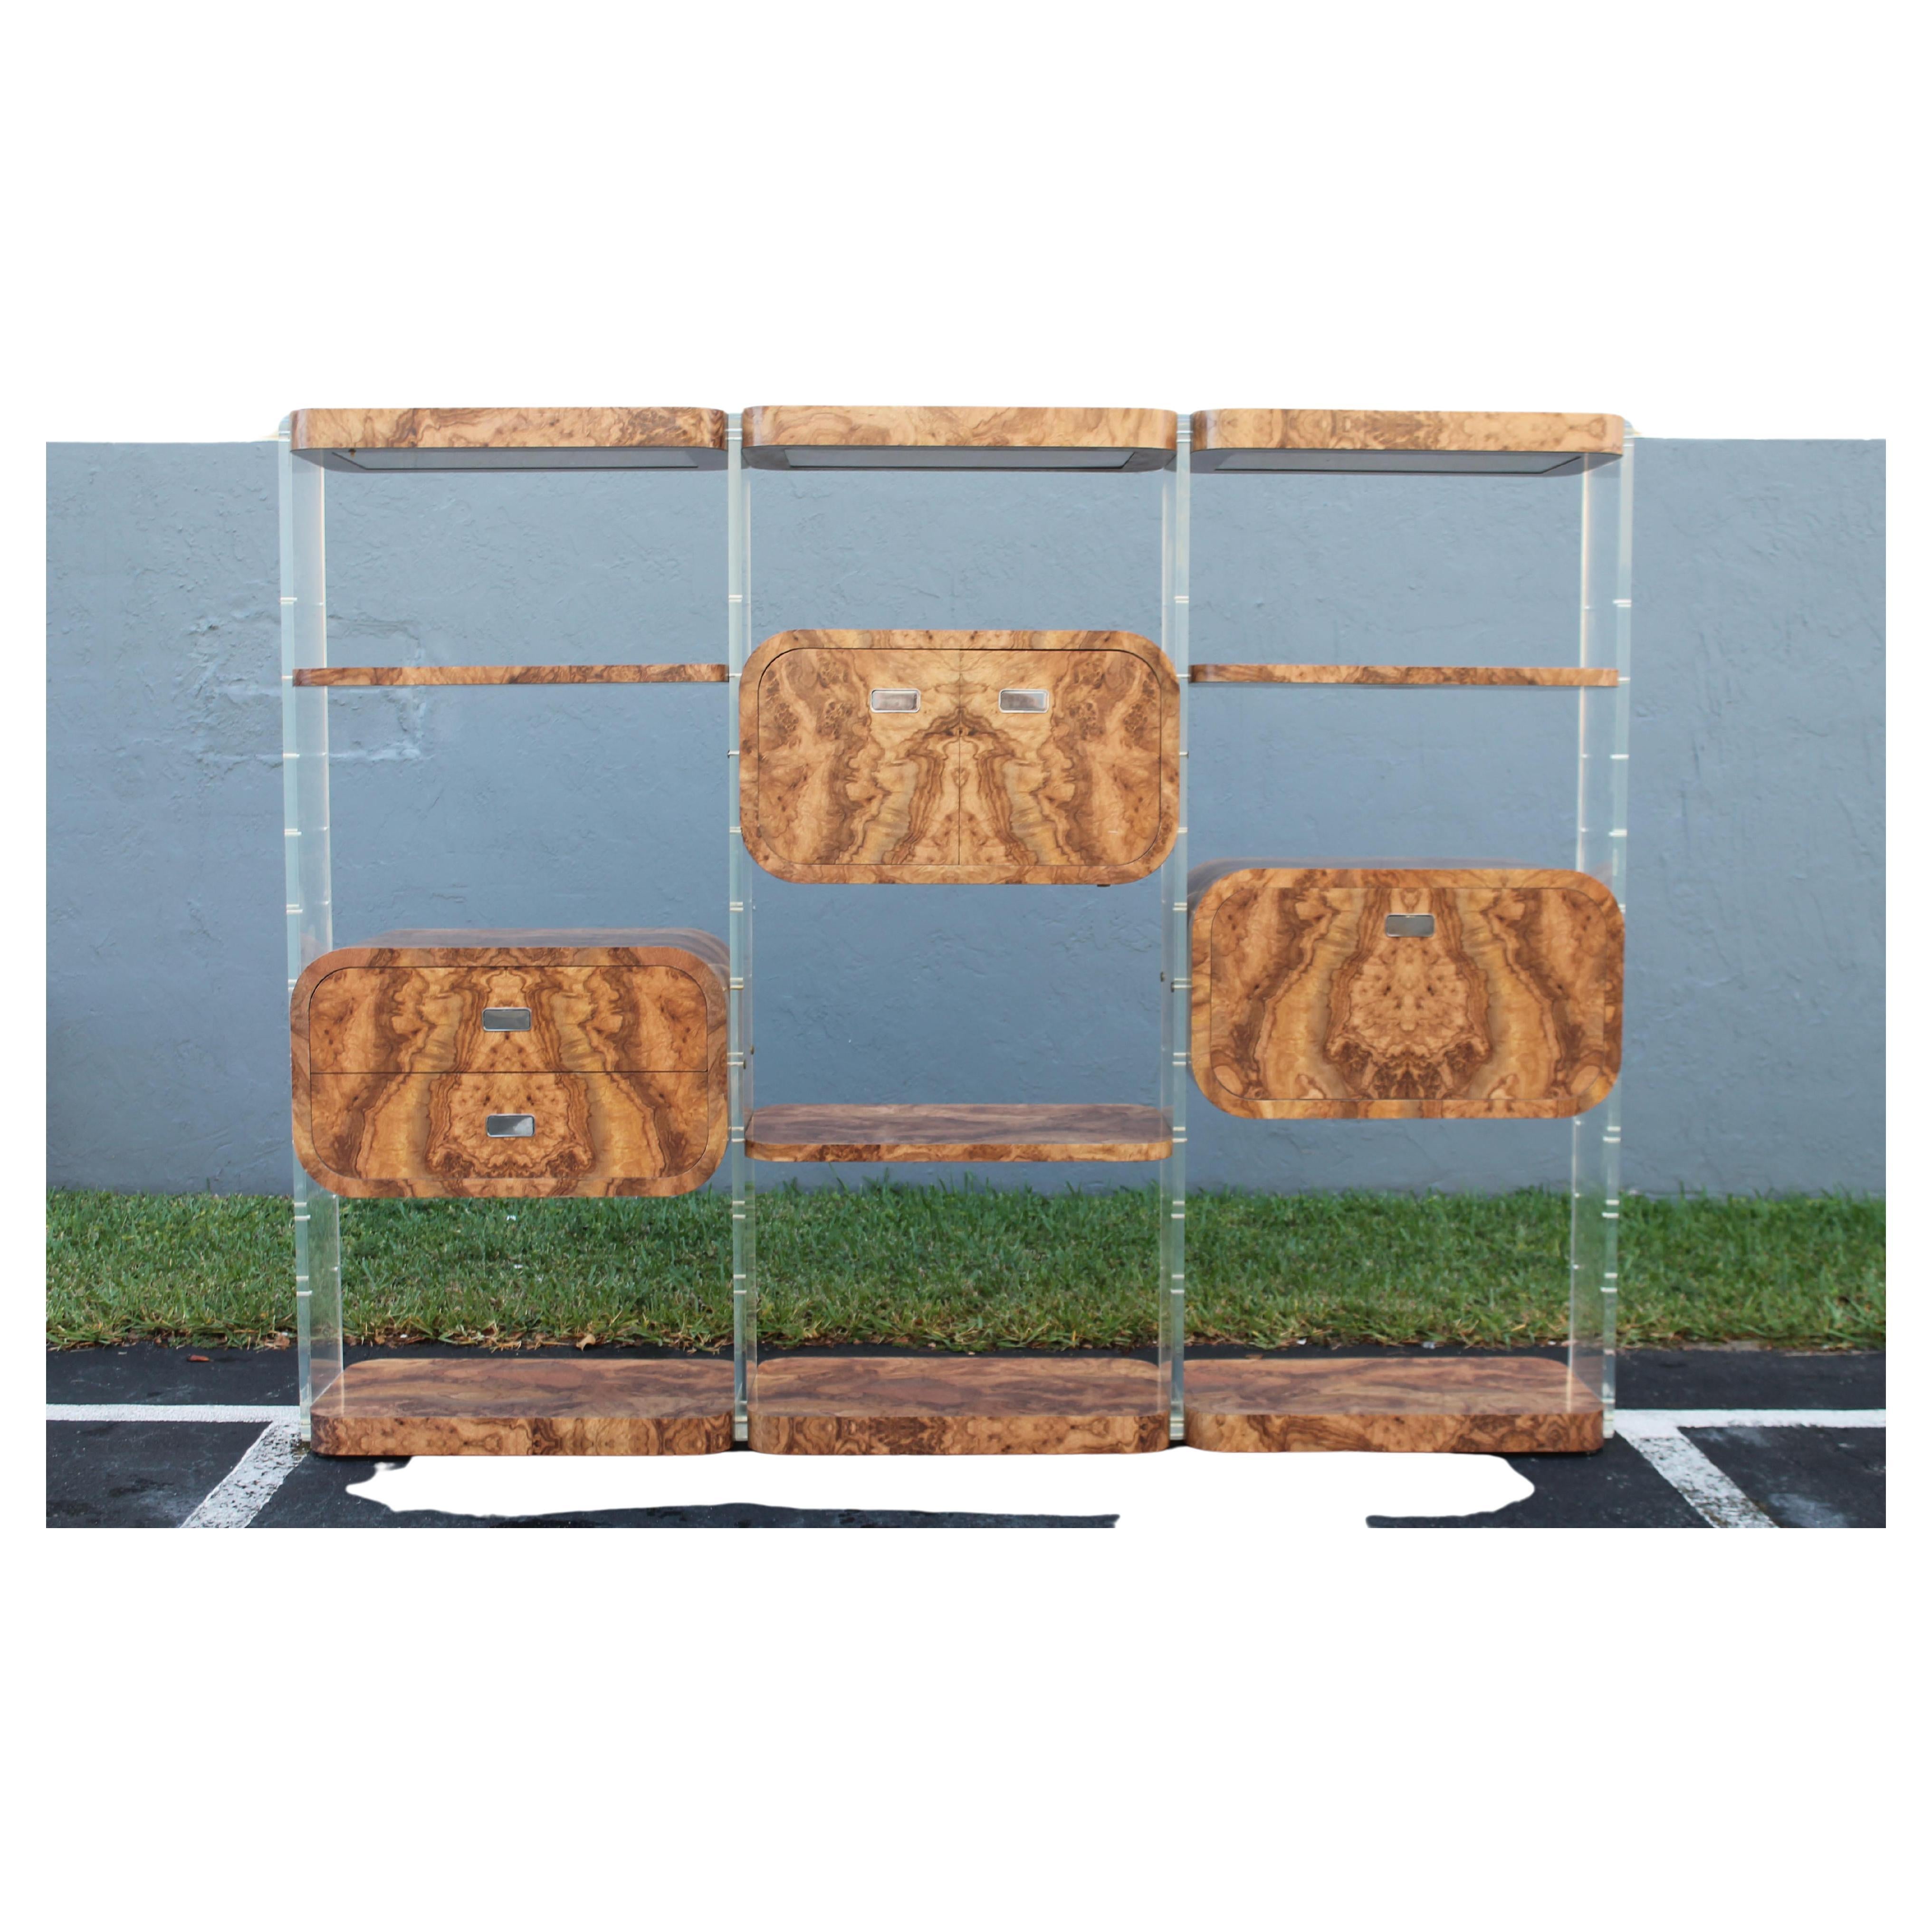 1970's XL Lucite with Melamine Room Divider/ Screen/ Wall Unit. Compartmentaized with faux exotic wood detail. Dry bar / desk/ adjustable shelves. Top hidden lighting. Chrome handles. Palm Beach Estate acquisition. Disassembles for shipping and this